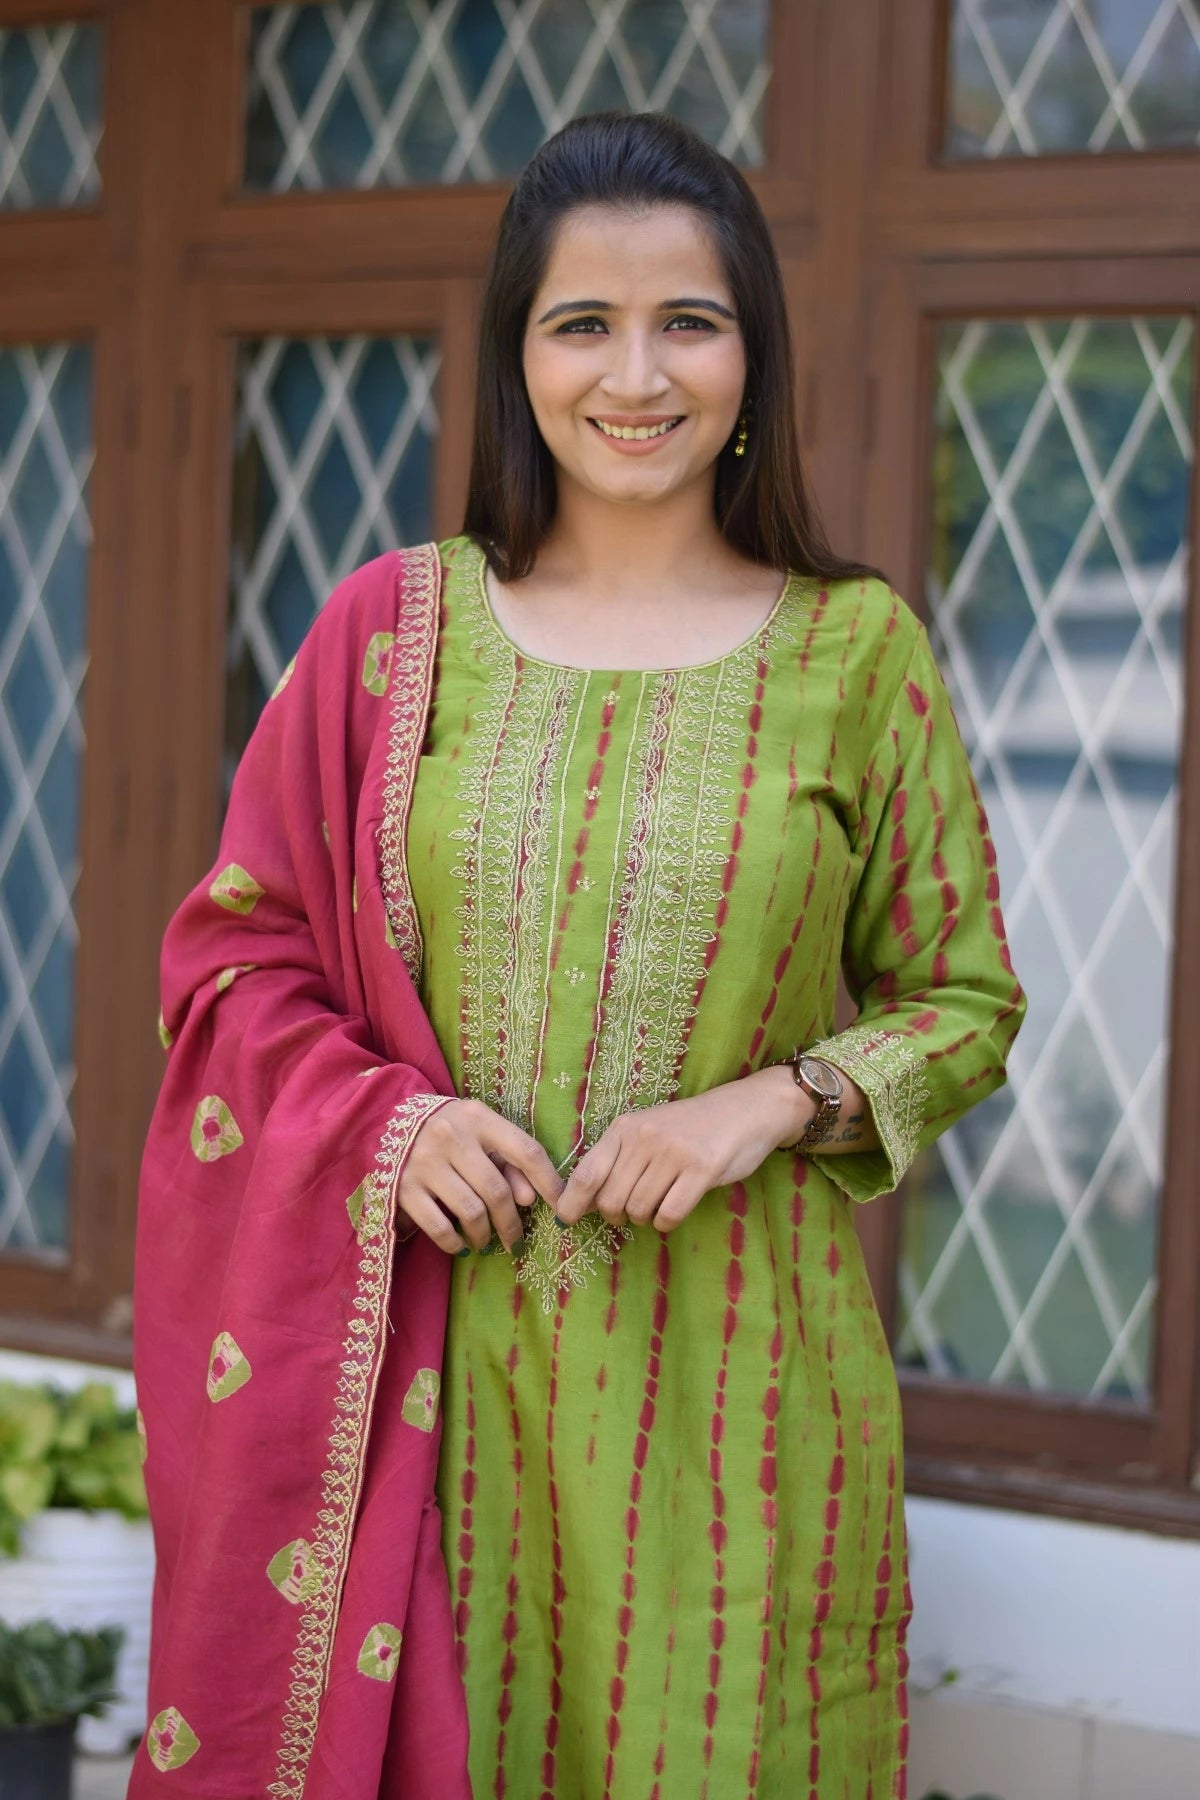 A woman wearing a stunning zari hand work suit with intricate golden embroidery.